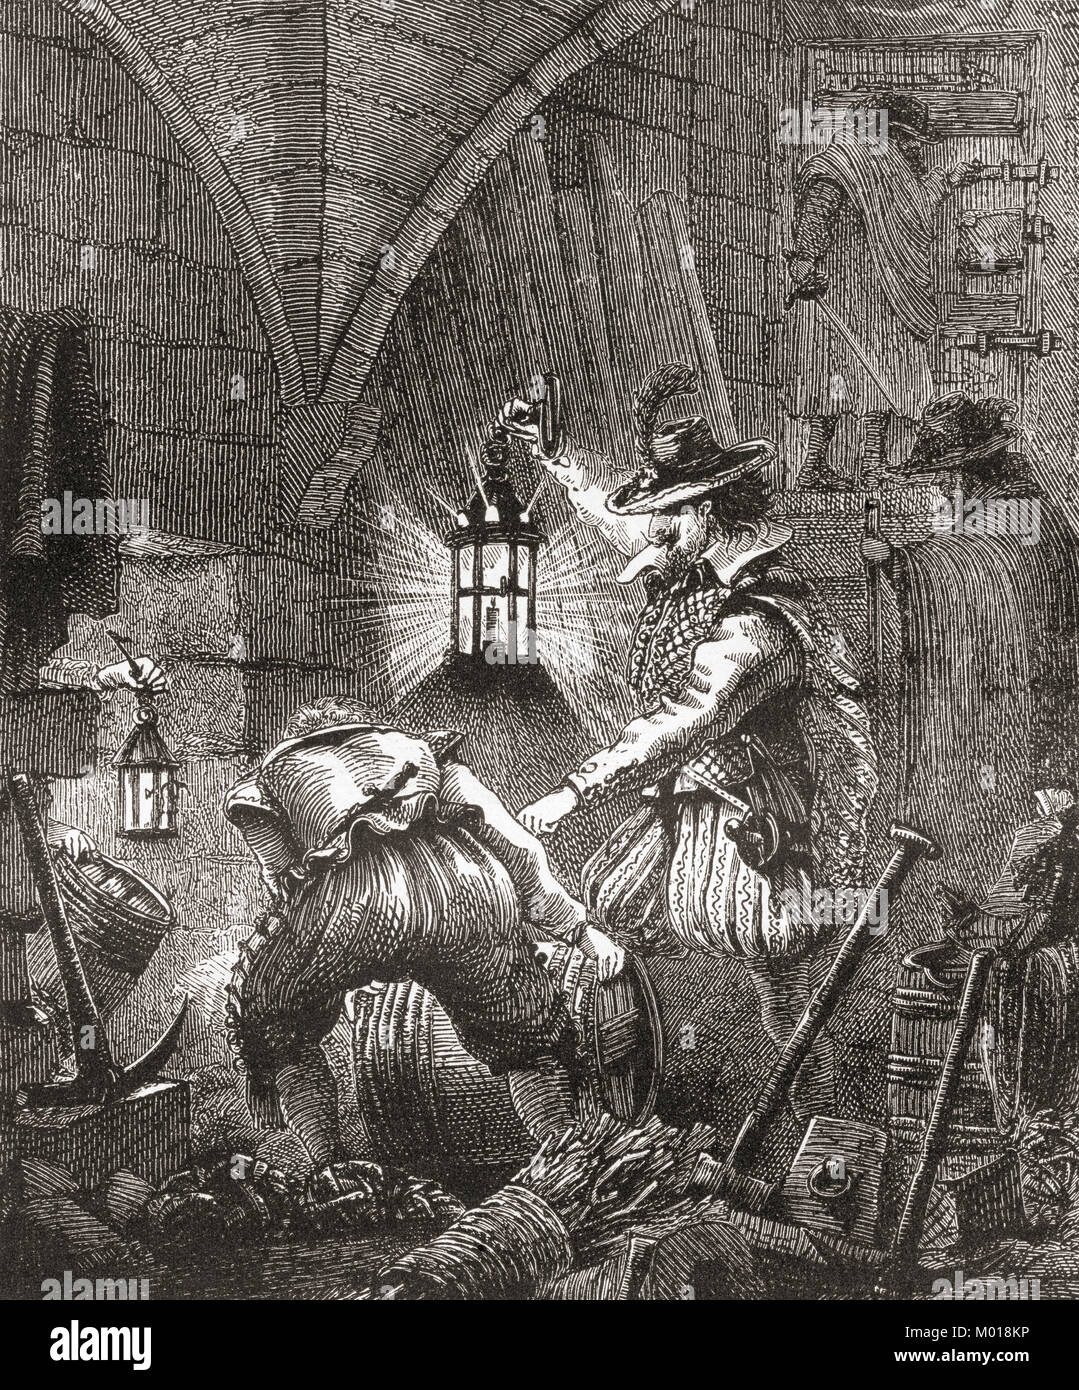 Guy Fawkes and the conspirators at work.  Guy Fawkes, 1570 – 1606, aka Guido Fawkes, member of a group of provincial English Catholics who took part in The Gunpowder Plot of 1605, aka Gunpowder Treason Plot or the Jesuit Treason, a failed assassination attempt against King James I of England and VI of Scotland. The plot was to blow up the House of Lords during the State Opening of England's Parliament on 5 November 1605.  From Ward and Lock's Illustrated History of the World, published c.1882. Stock Photo